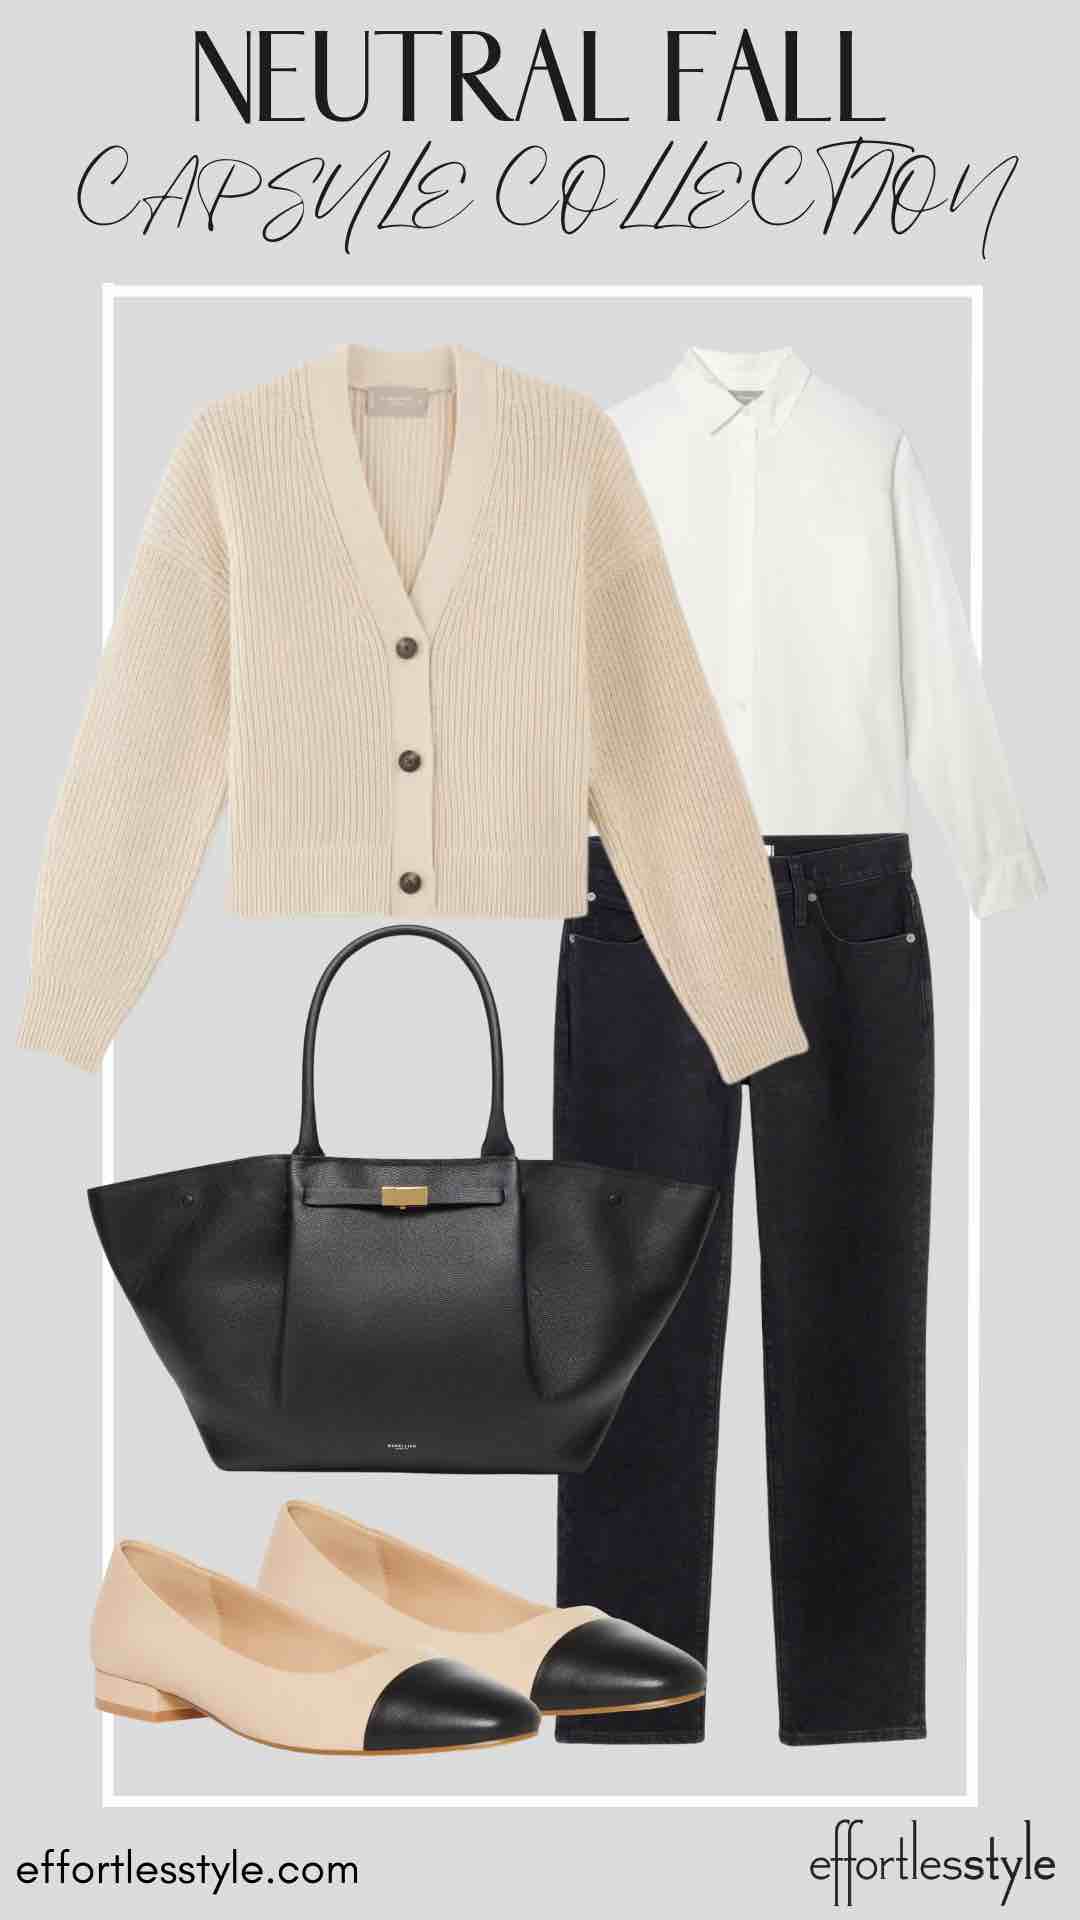 How To Wear Our Neutral Fall Capsule Wardrobe - Part 2 Cardigan & Black Jeans classic looks for fall timeless looks for fall how to wear ballet flats with jeans how to wear black jeans to the office how to style black jeans for work